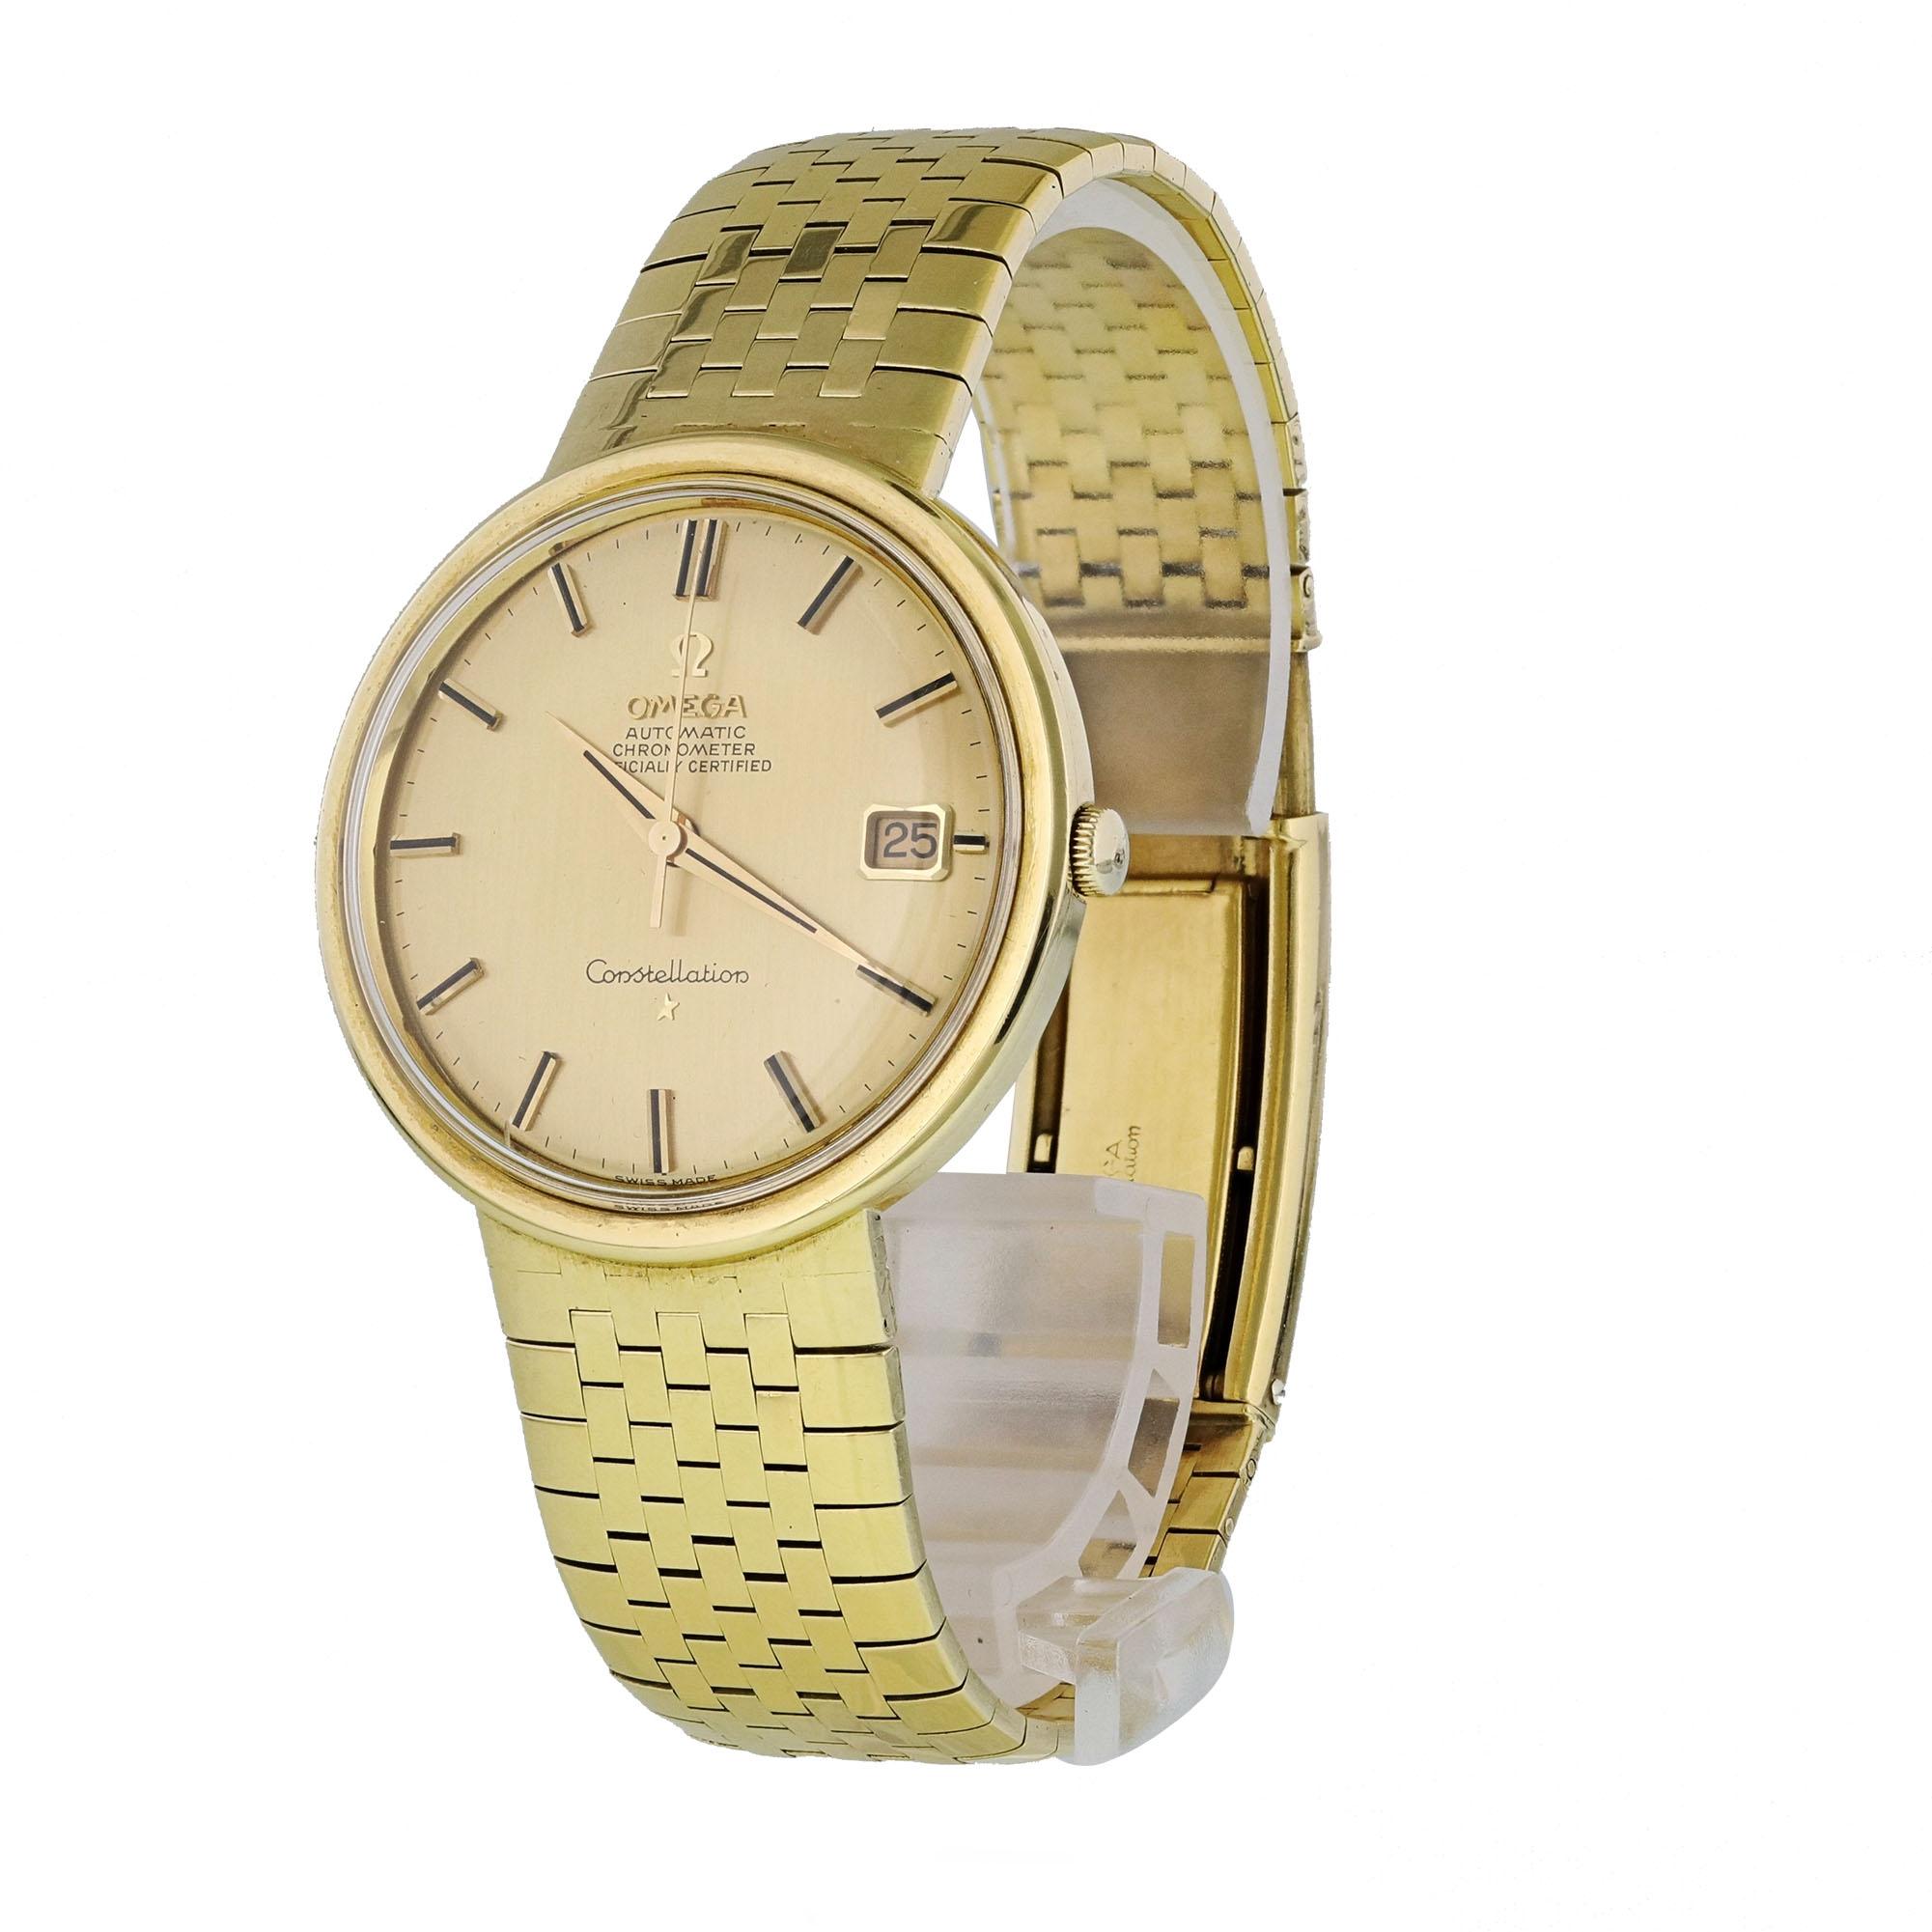 Omega Constellation 168.009 Mens Watch.
36mm 18k Yellow Gold case. 
Yellow Gold smooth bezel. 
Champagne dial with gold hands and index hour markers. 
Minute markers on the outer dial. 
Date display at the 3 o'clock position. 
Yellow Gold Bracelet